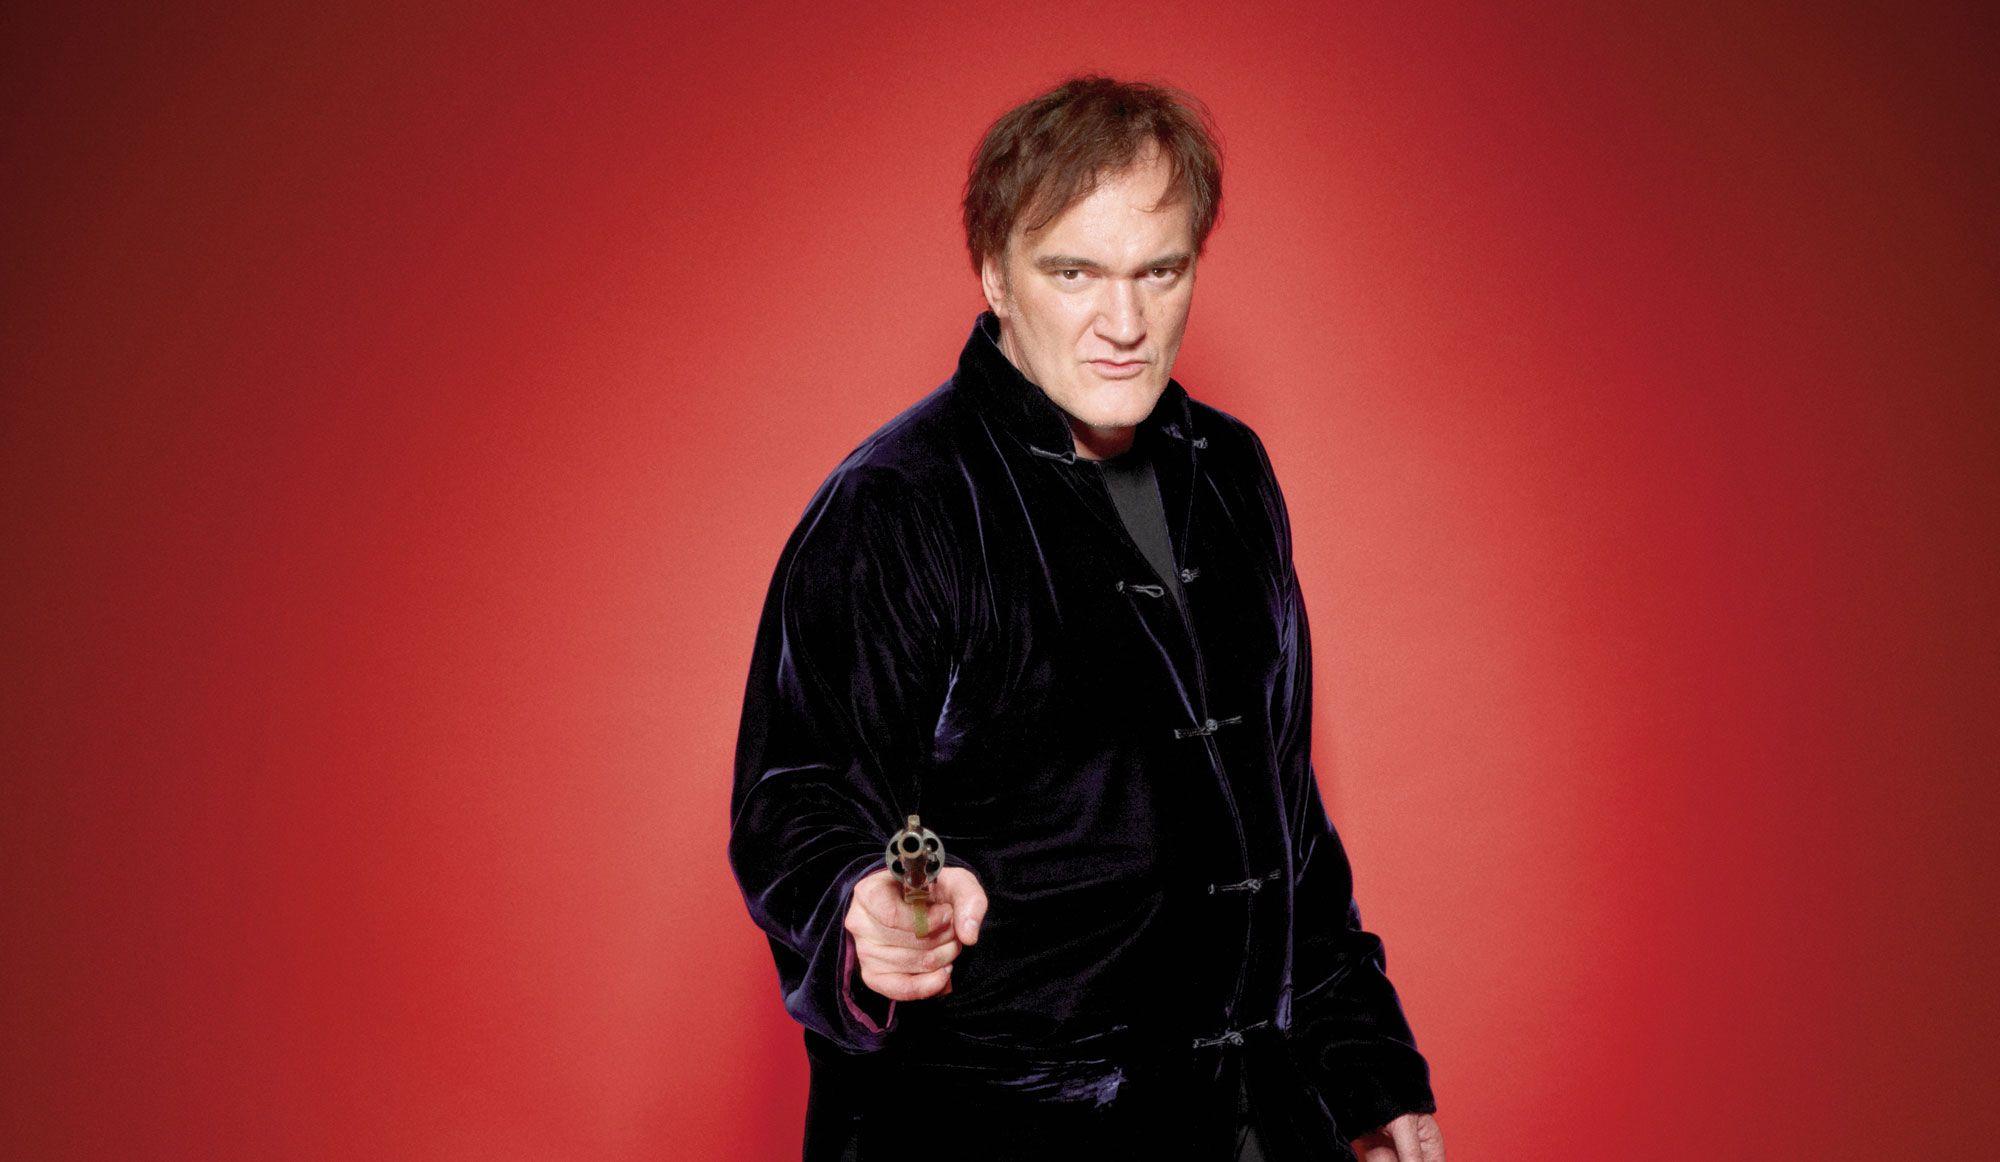 Best Quentin Tarantino Quotes From Movies & Interviews